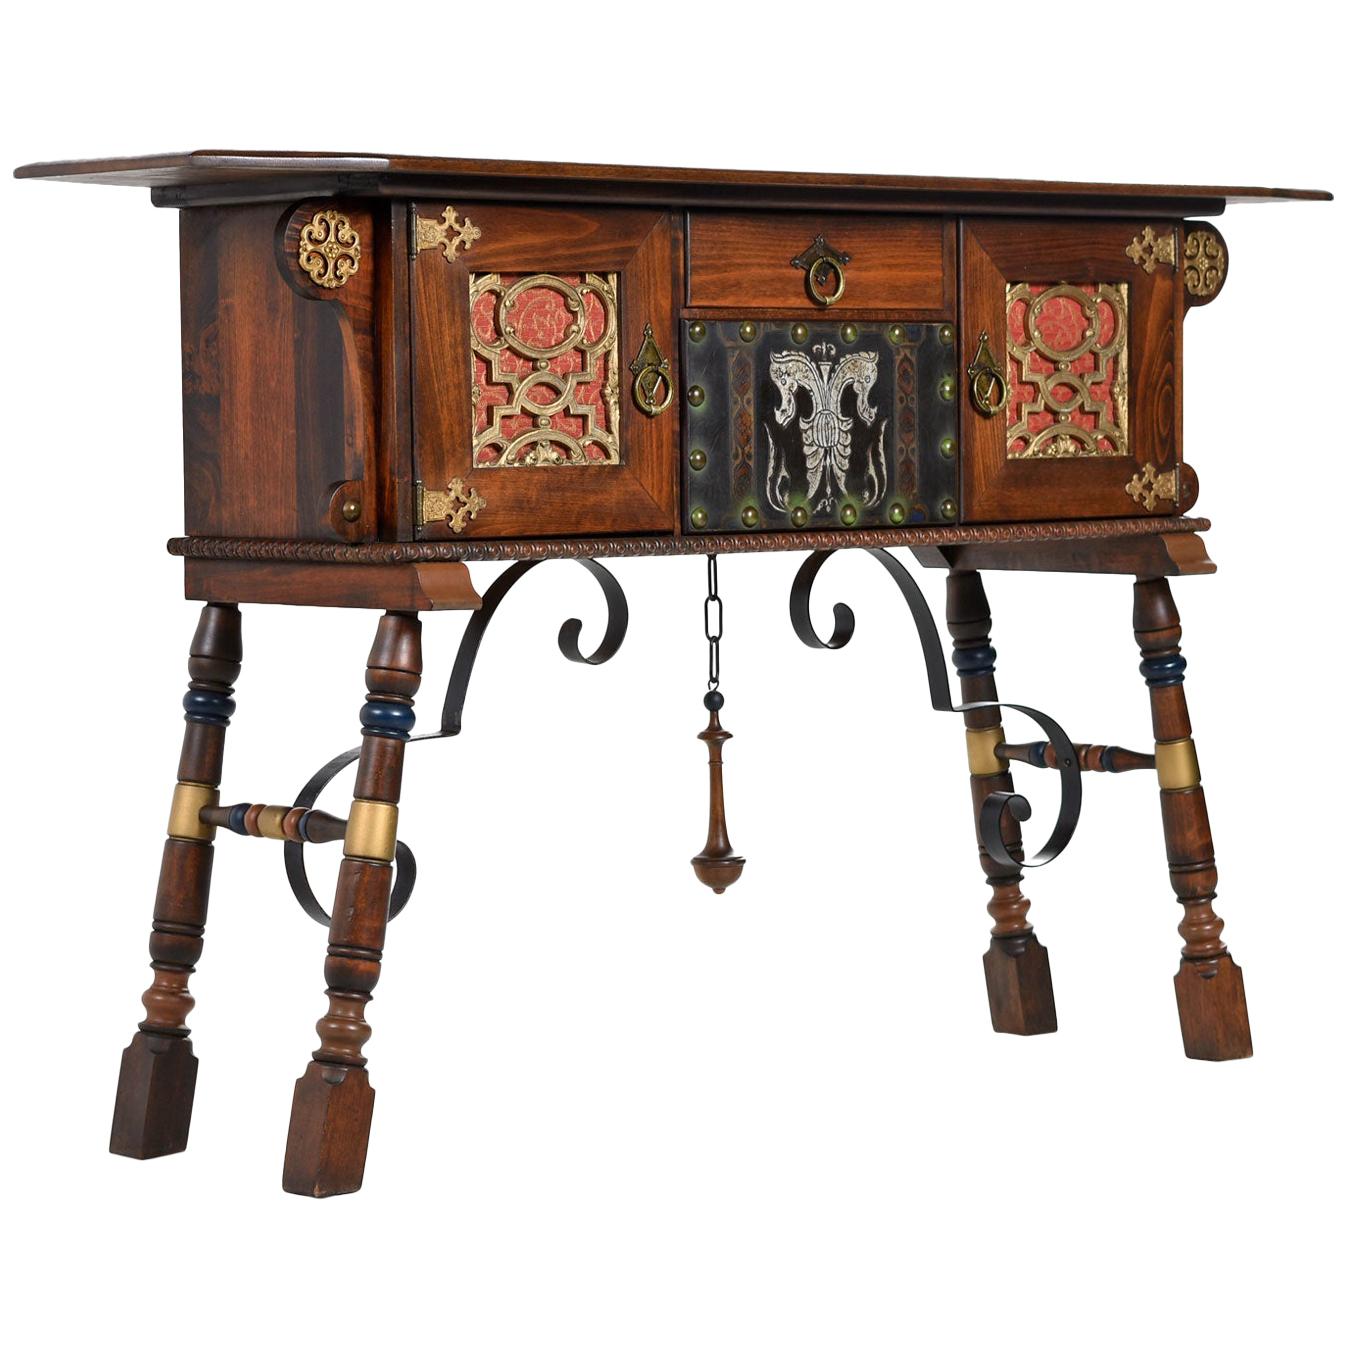 This sideboard begs a lot of questions. Some will remain unknown, but we'll do our best. First, take a broad, sweeping overview and lets all just agree this cabinet is beyond amazing. Even if medieval neo-goth and emo aren't your thing, you must